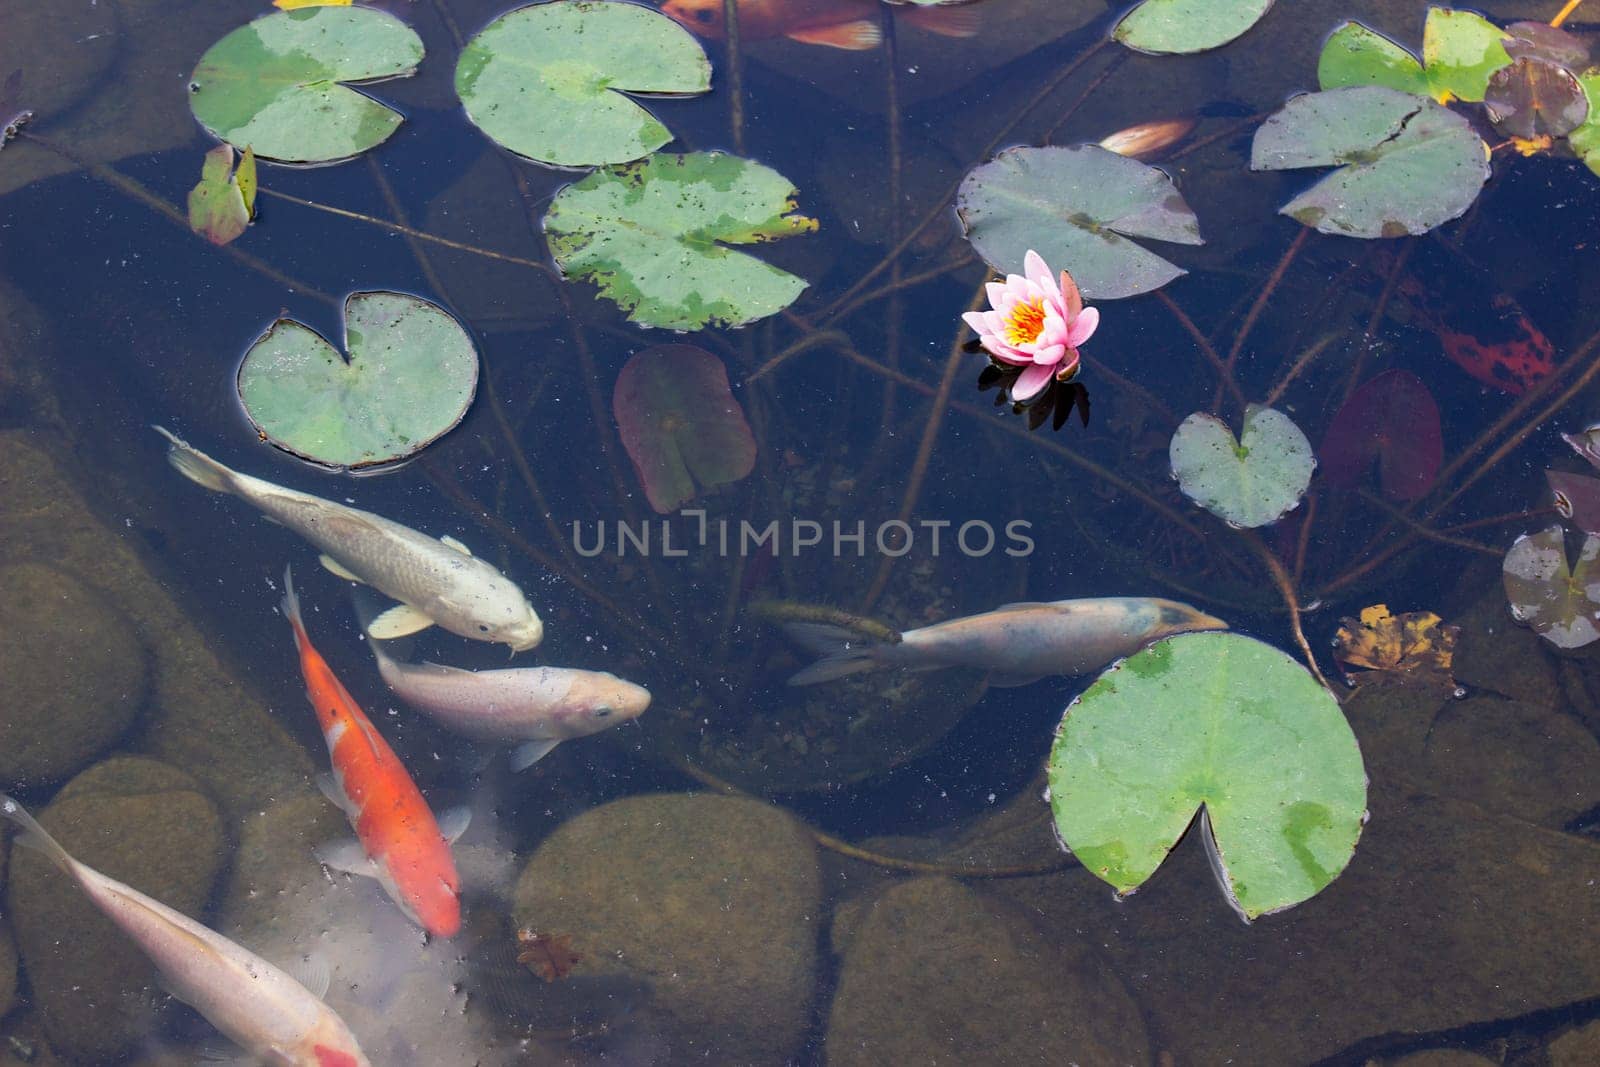 Koi Pond Carp Fish swims among water lily in the water slowly in the park